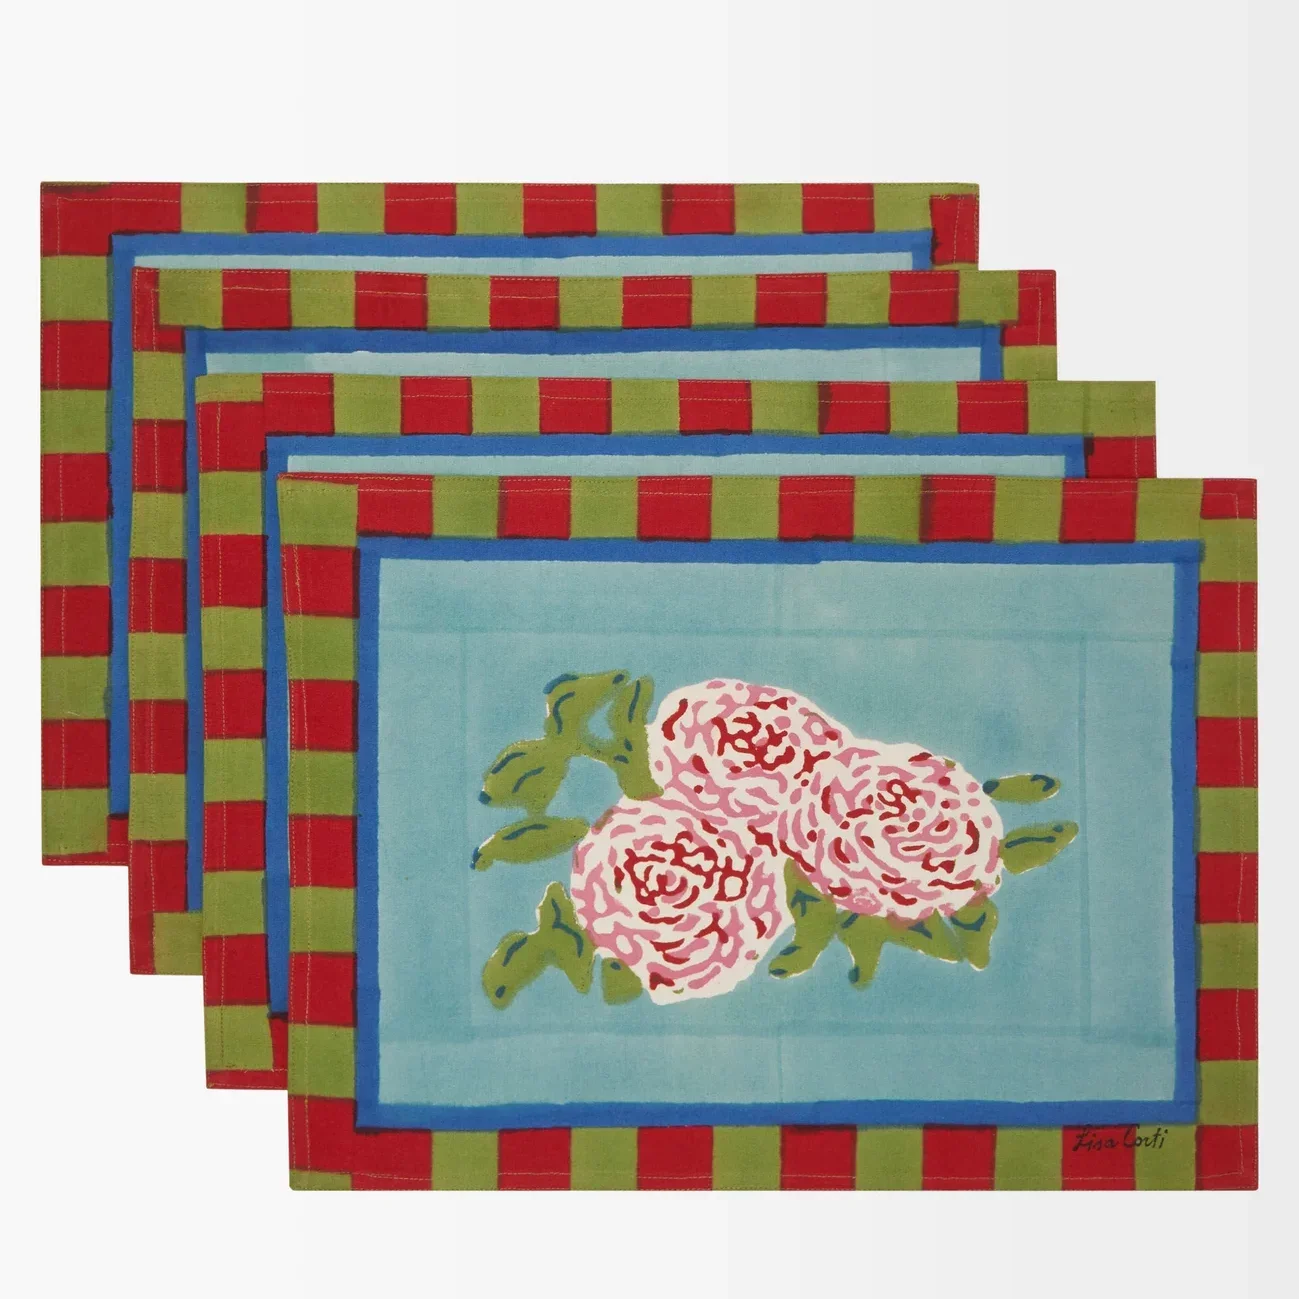 Four floral placemats with red and green striped borders diagonally arranged on a white surface.